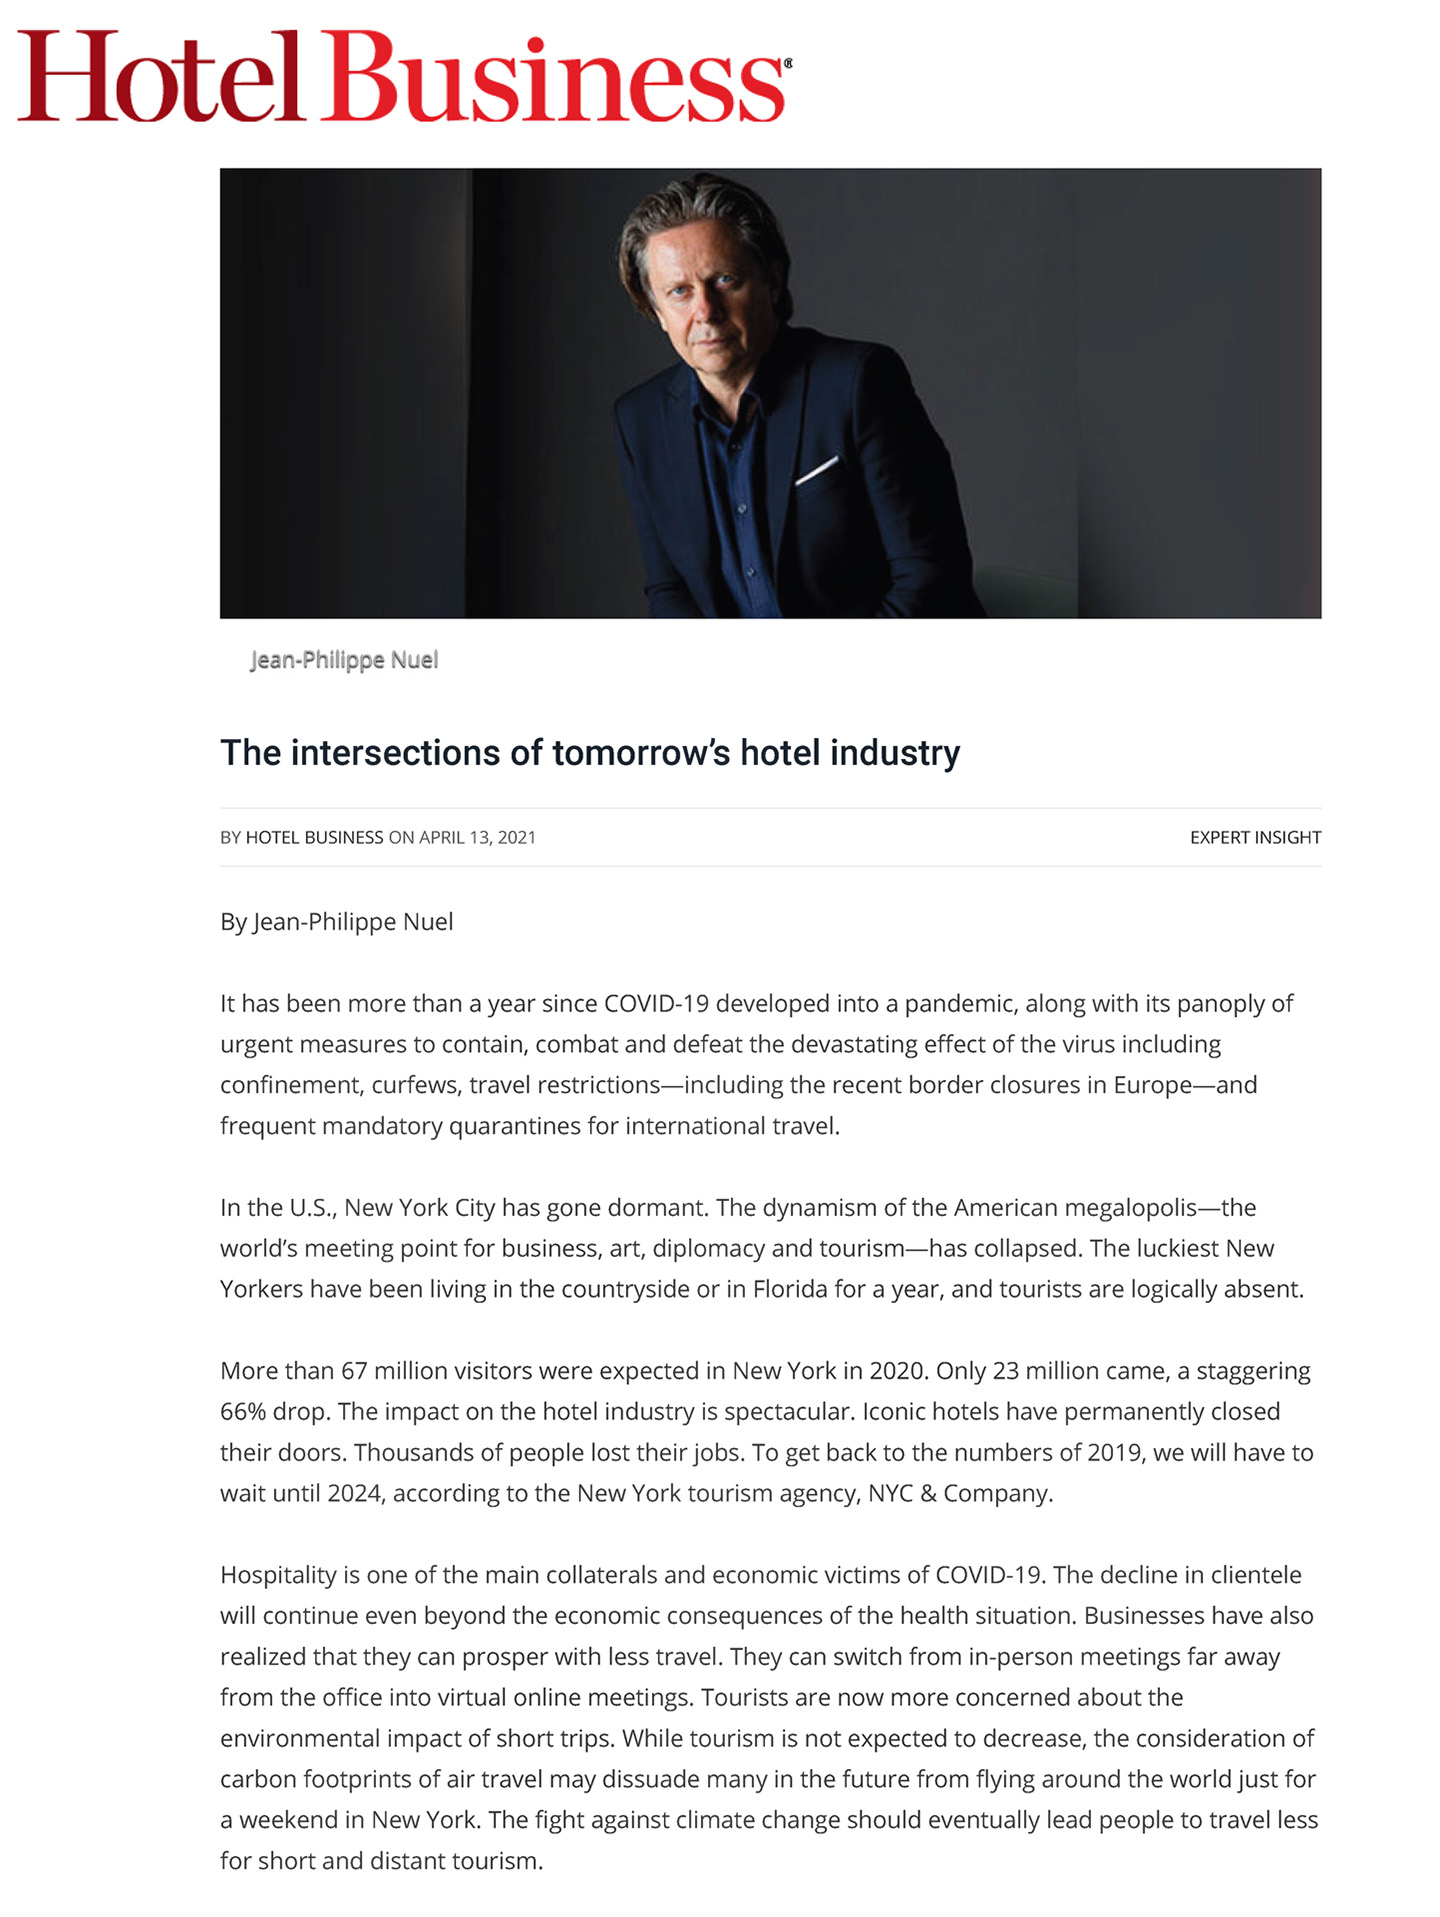 Article in Hotel business about jean-philippe nuel and his vision of the hotel industry of tomorrow, interior design, french designer